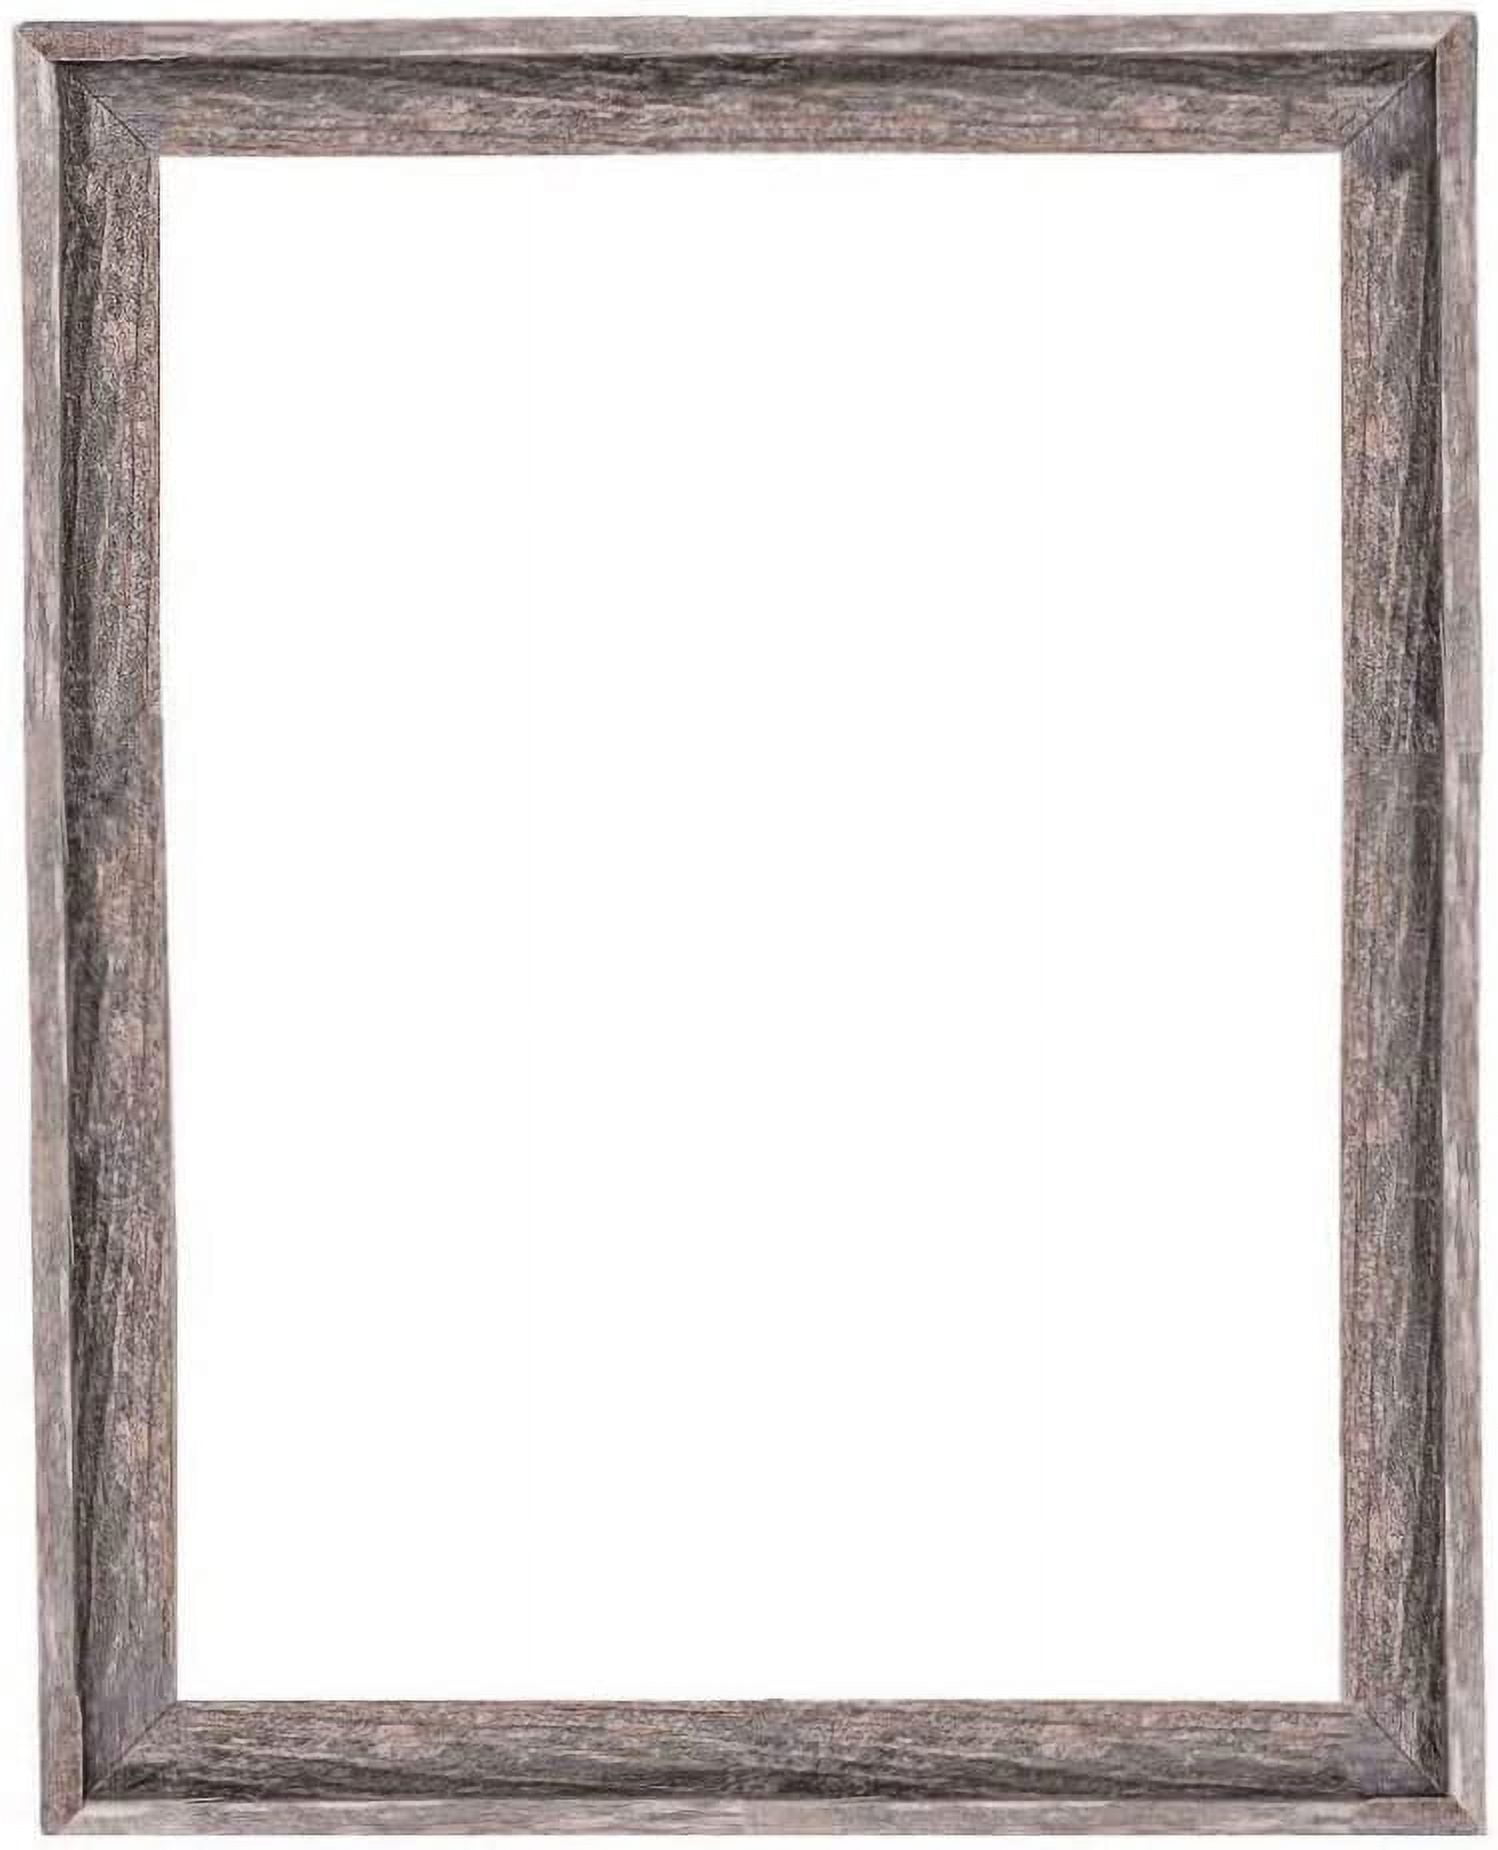 2-5/8 Rustic Barnwood Distressed Wood Picture Frame: 16X24*